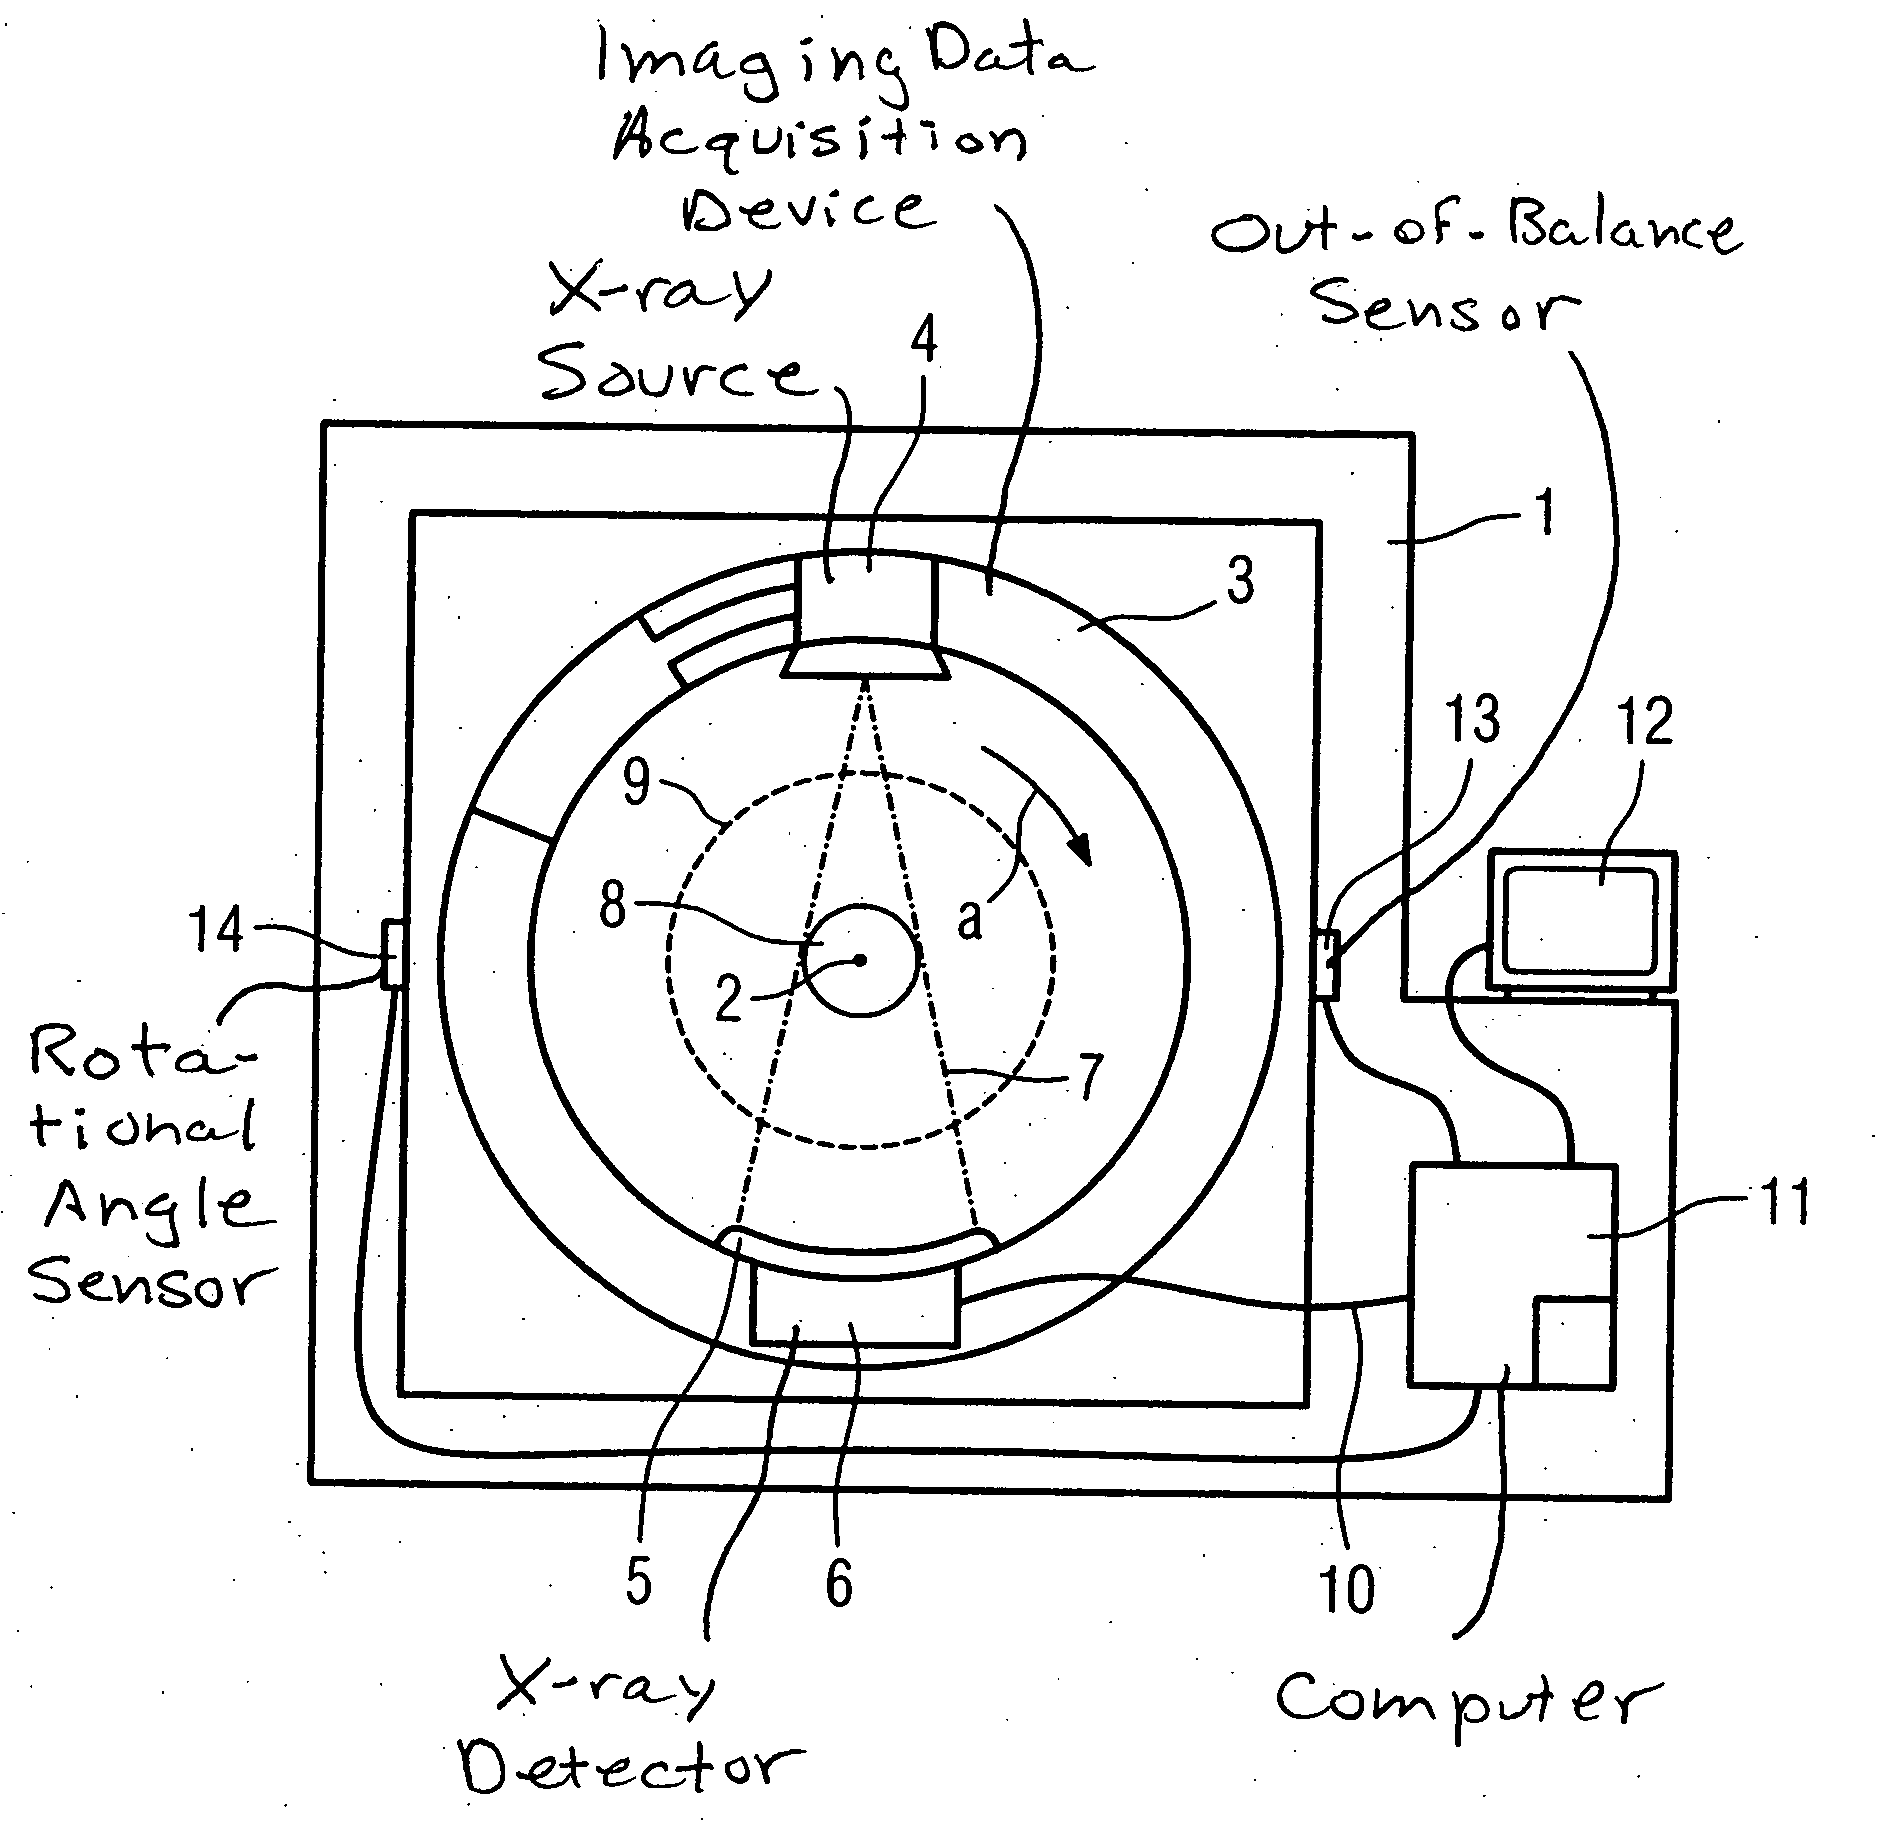 Imaging tomography apparatus with out-of-balance compensation